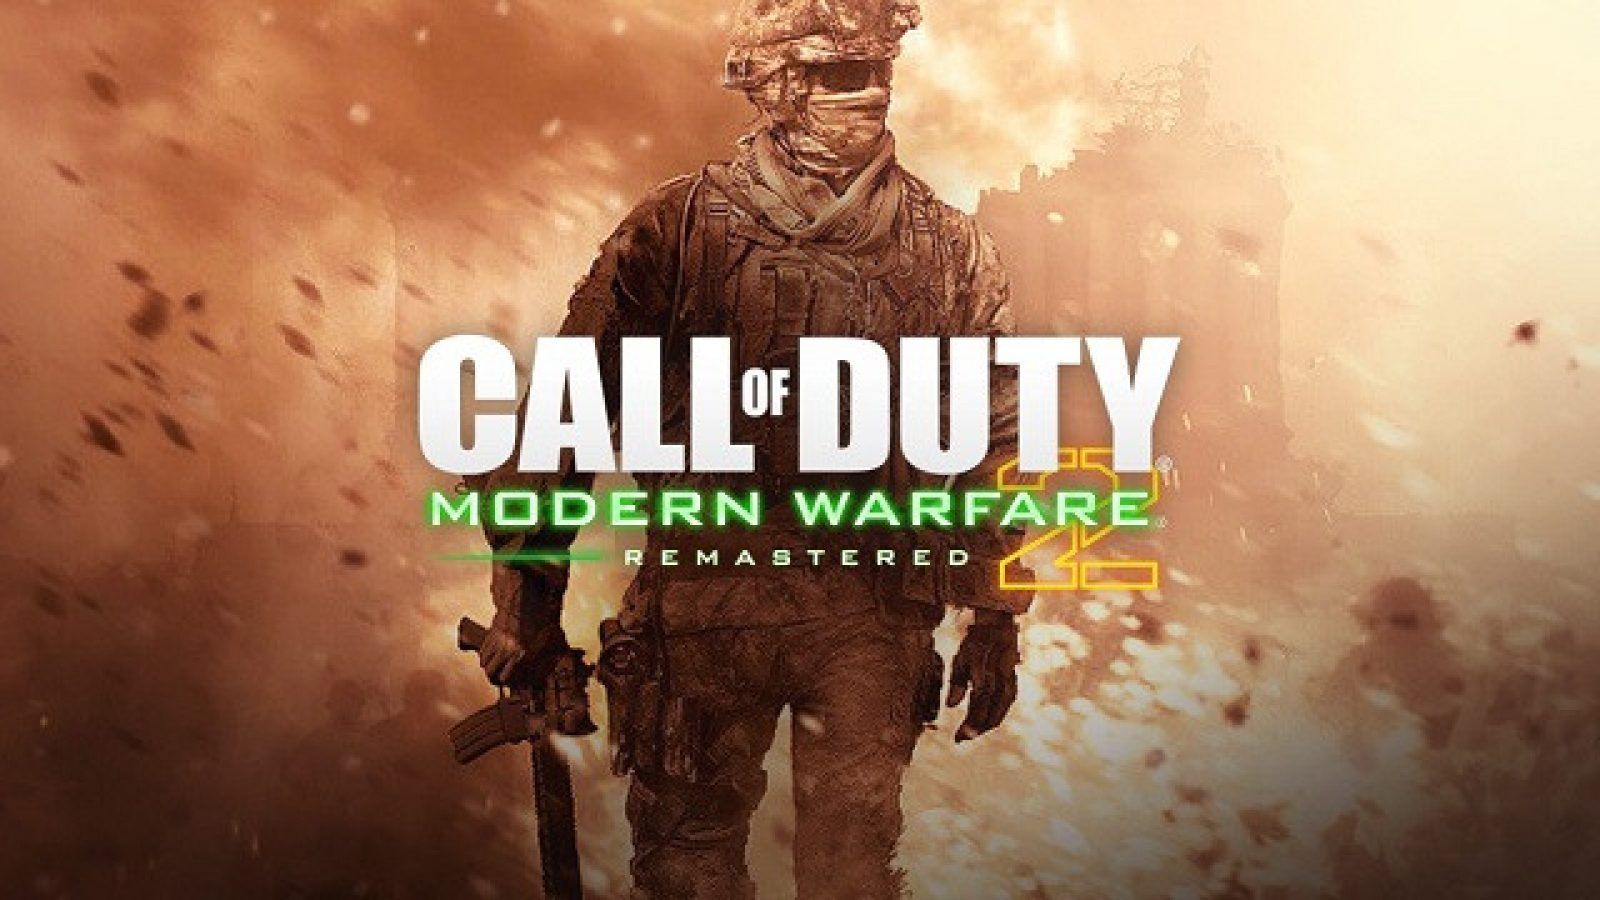 Call of Duty: Modern Warfare confirmed but where is MW2 Remastered